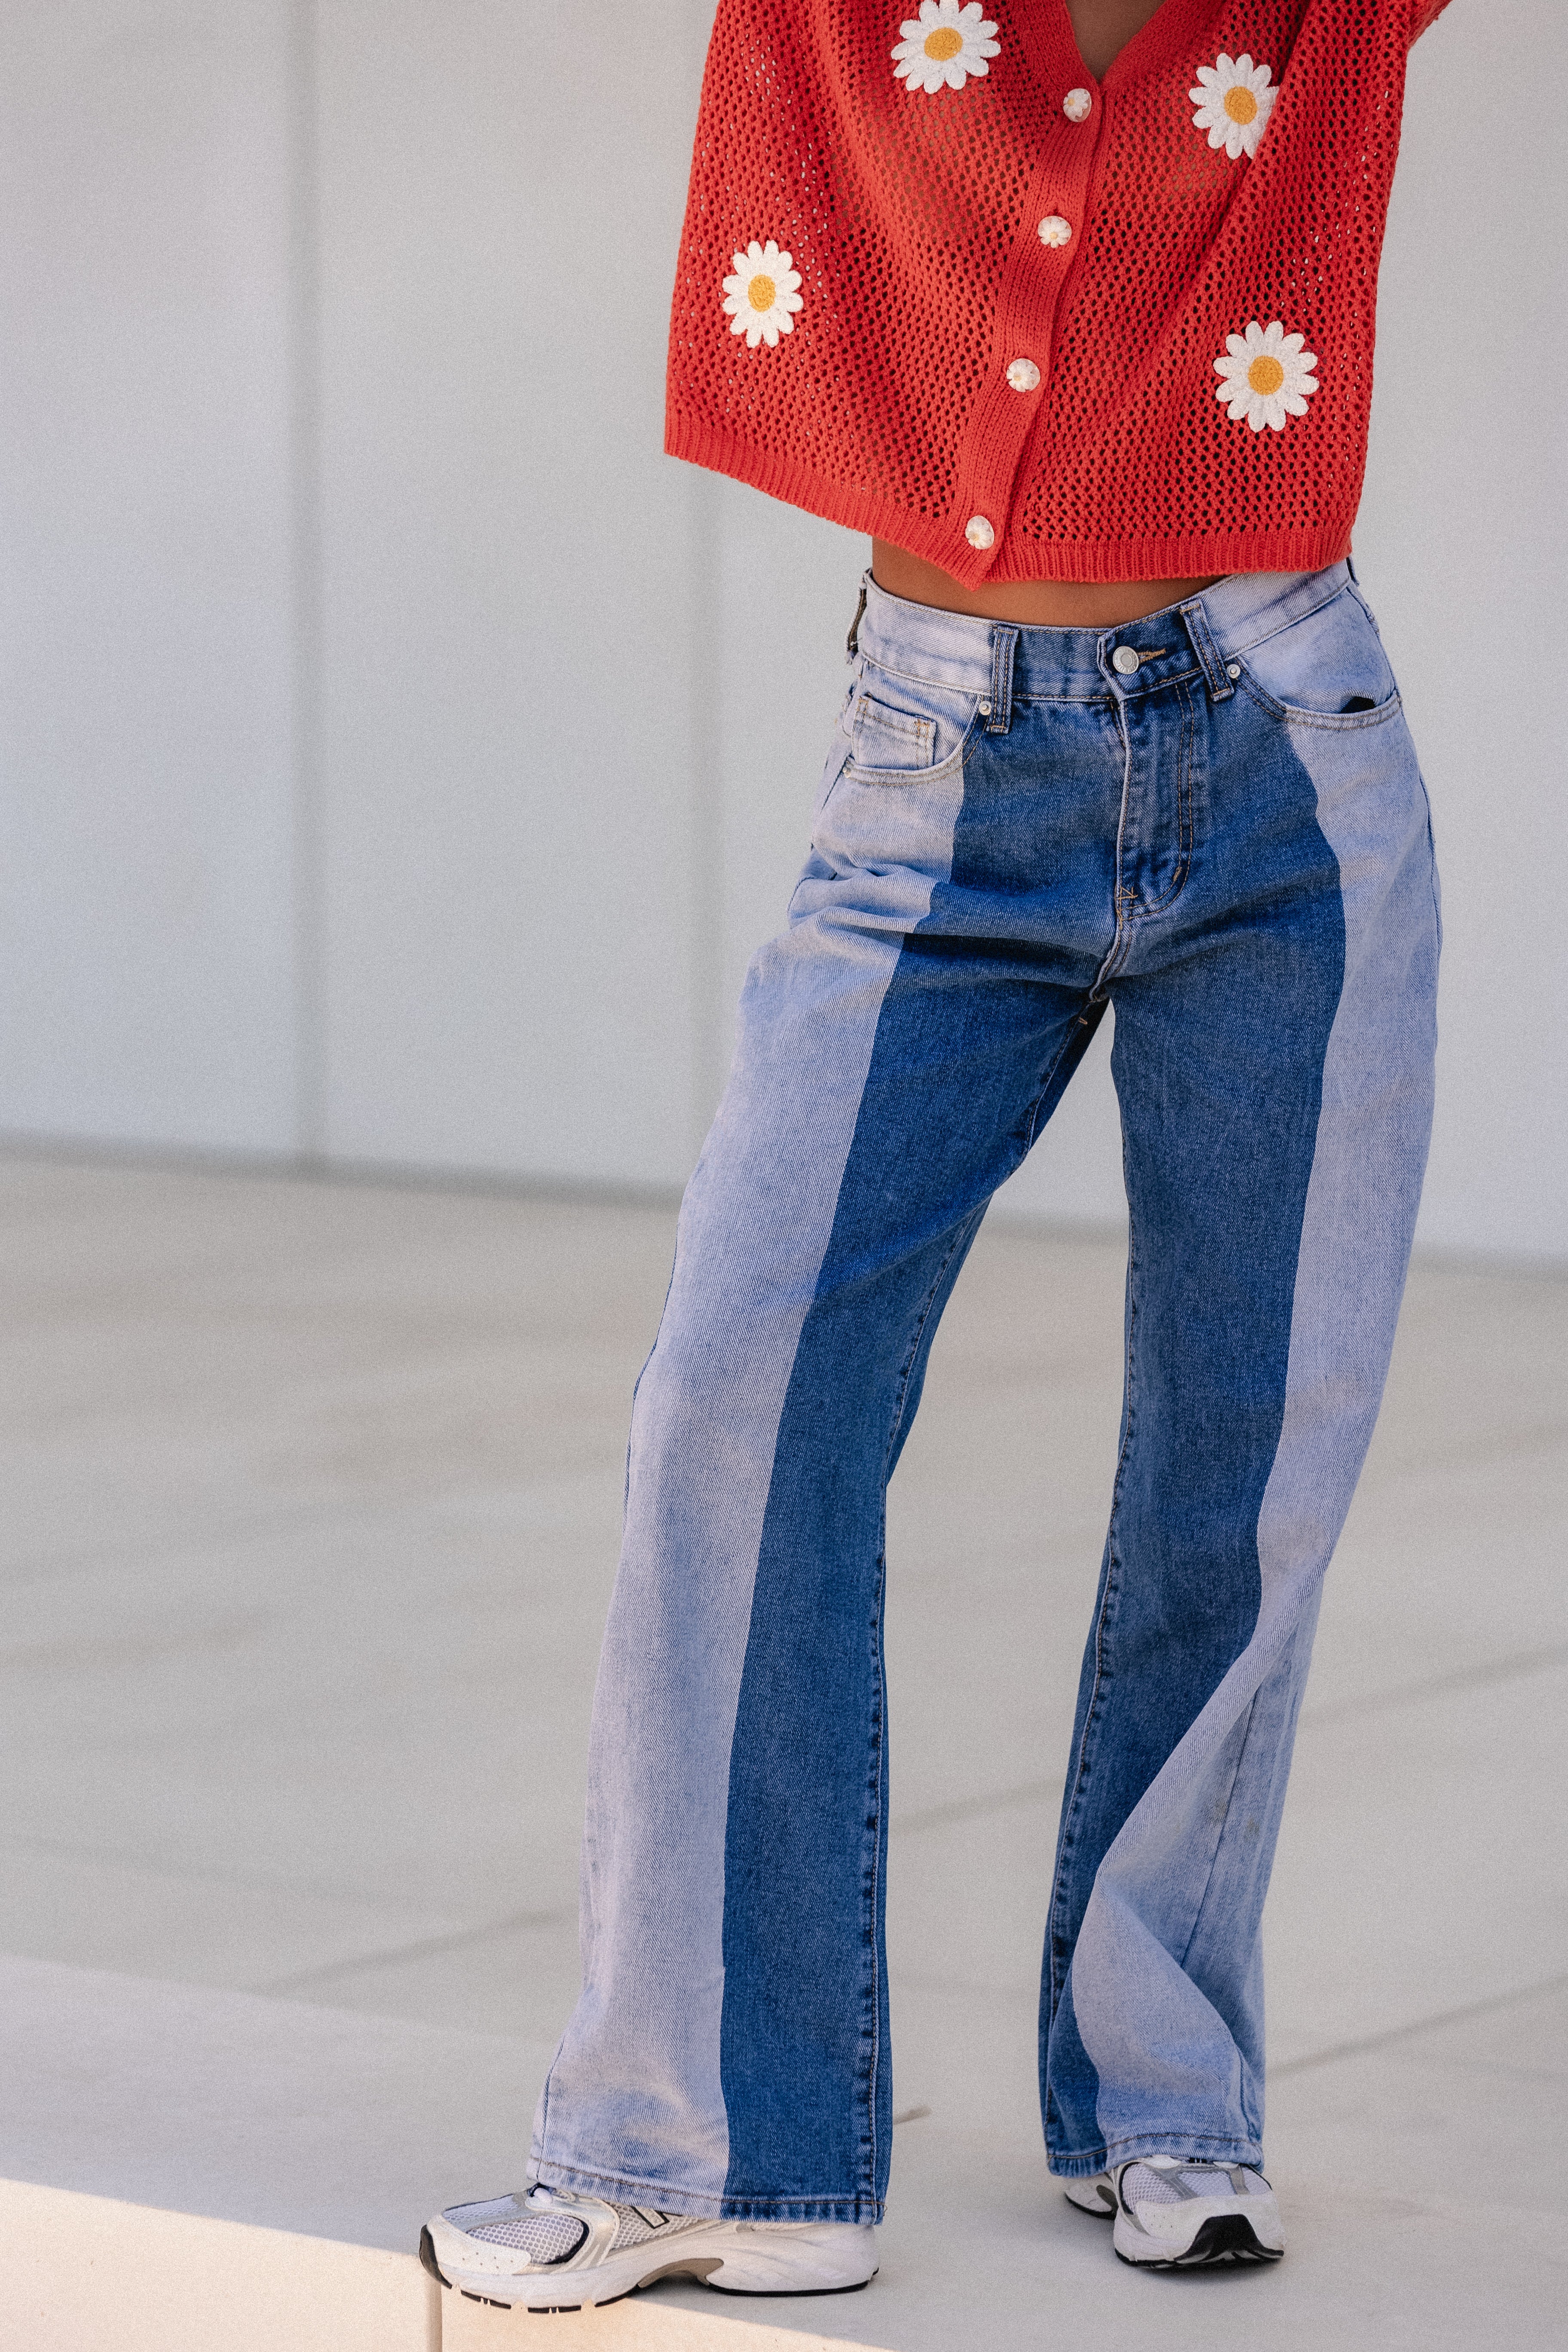 TWO- TONES JEANS